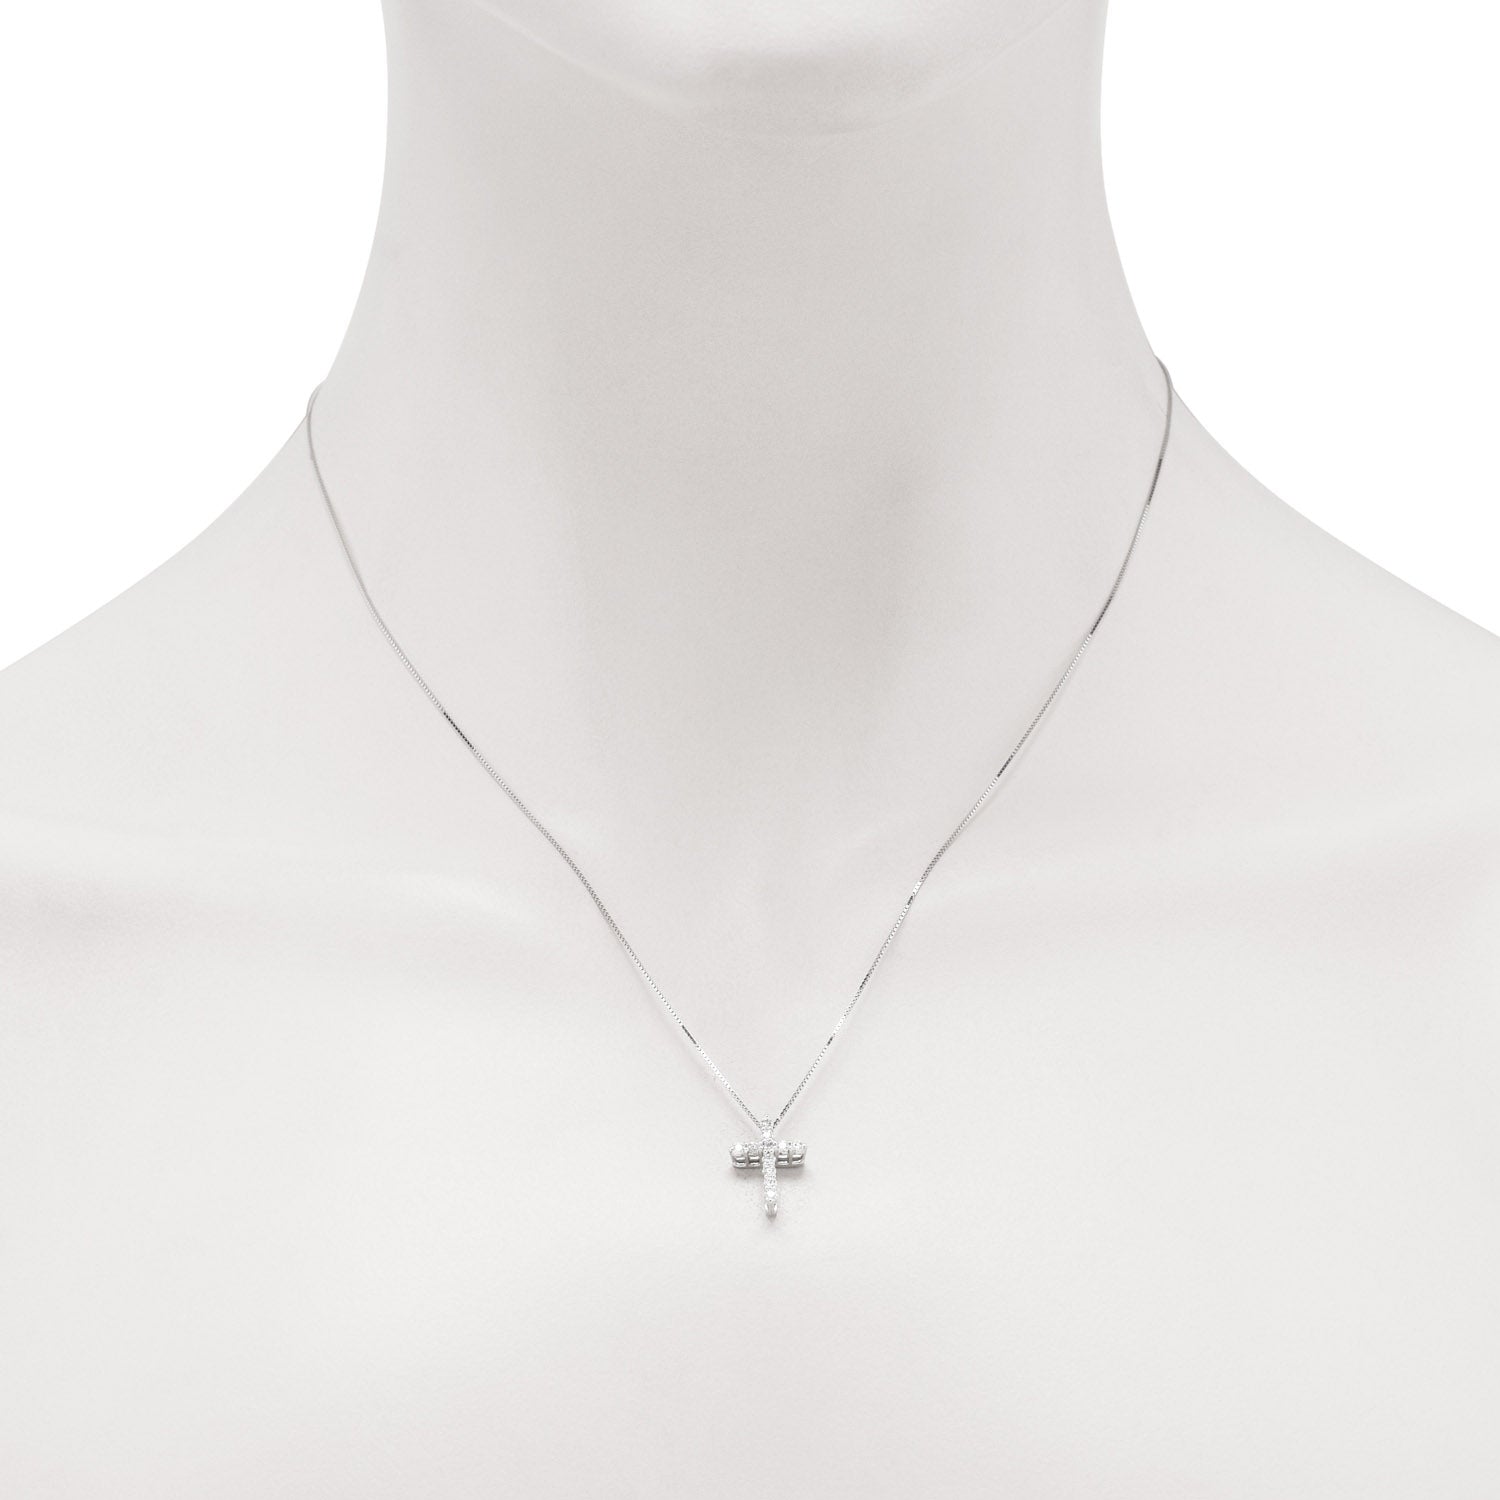 Northern Star Diamond Cross Necklace in 10kt White Gold (1/4ct tw)